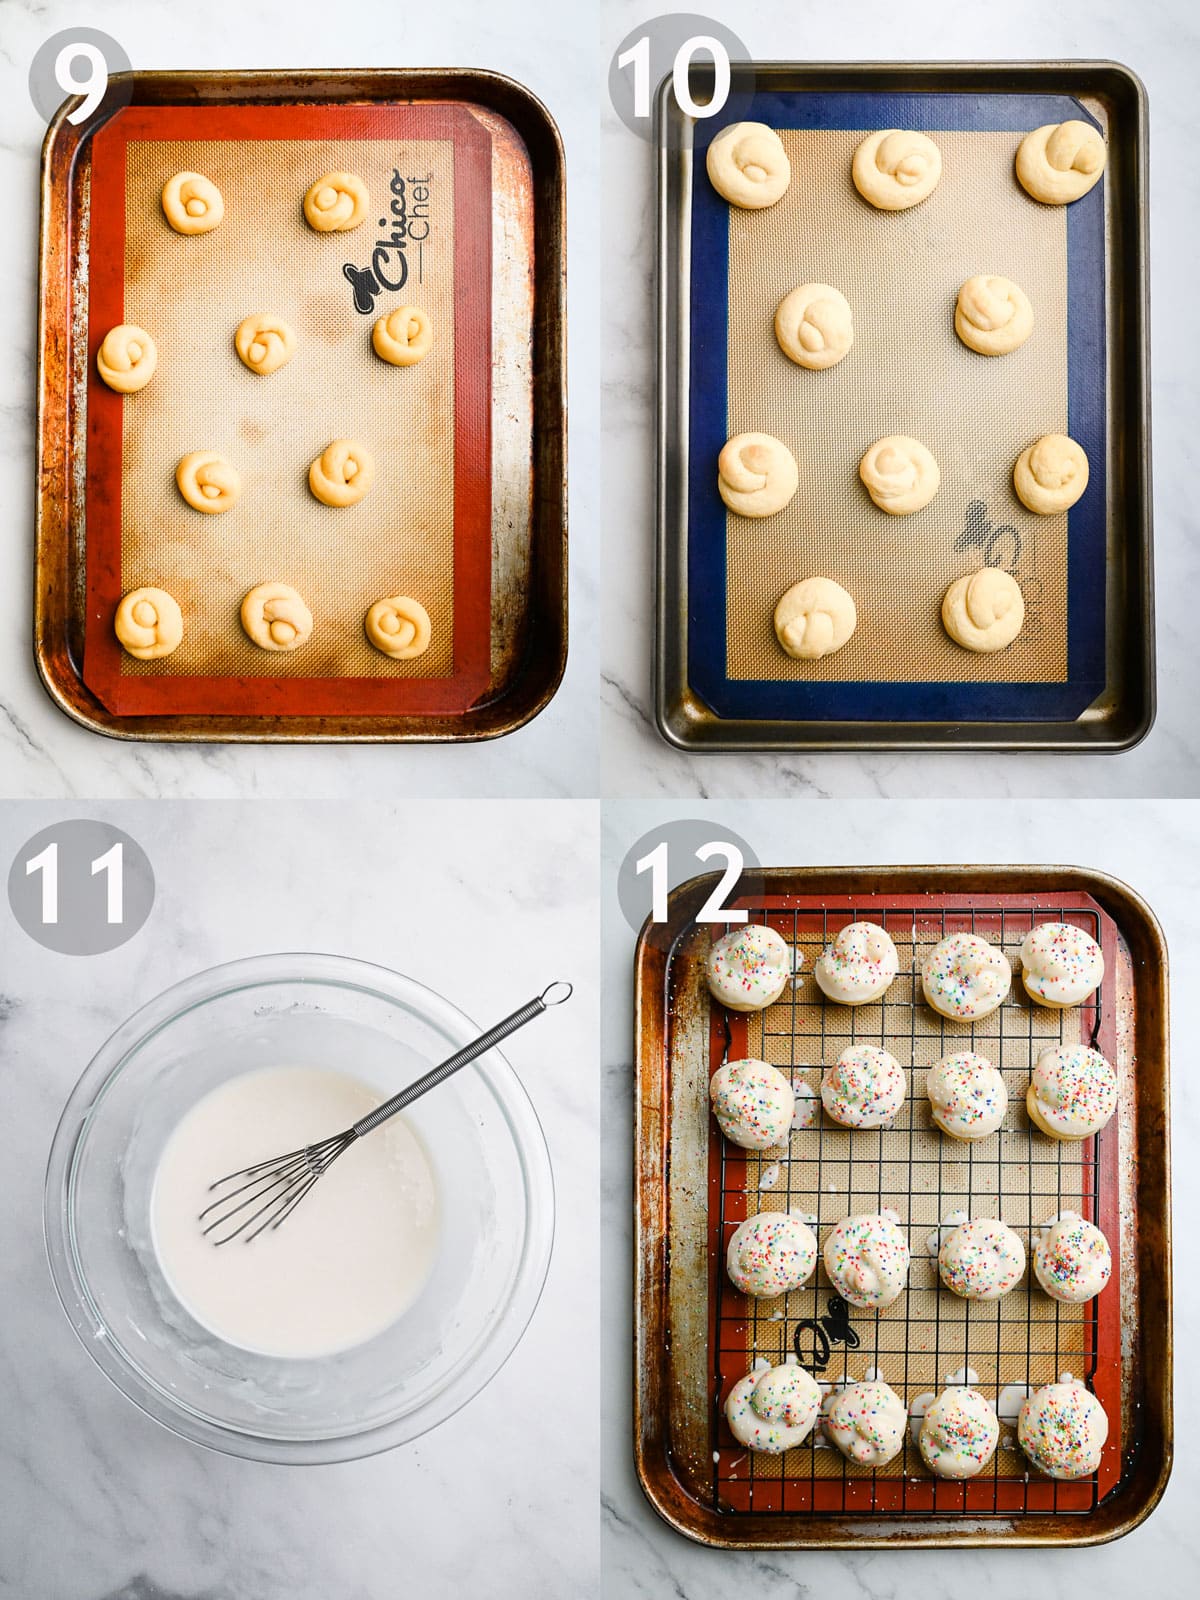 Steps to make cookies including baking and glazing them.